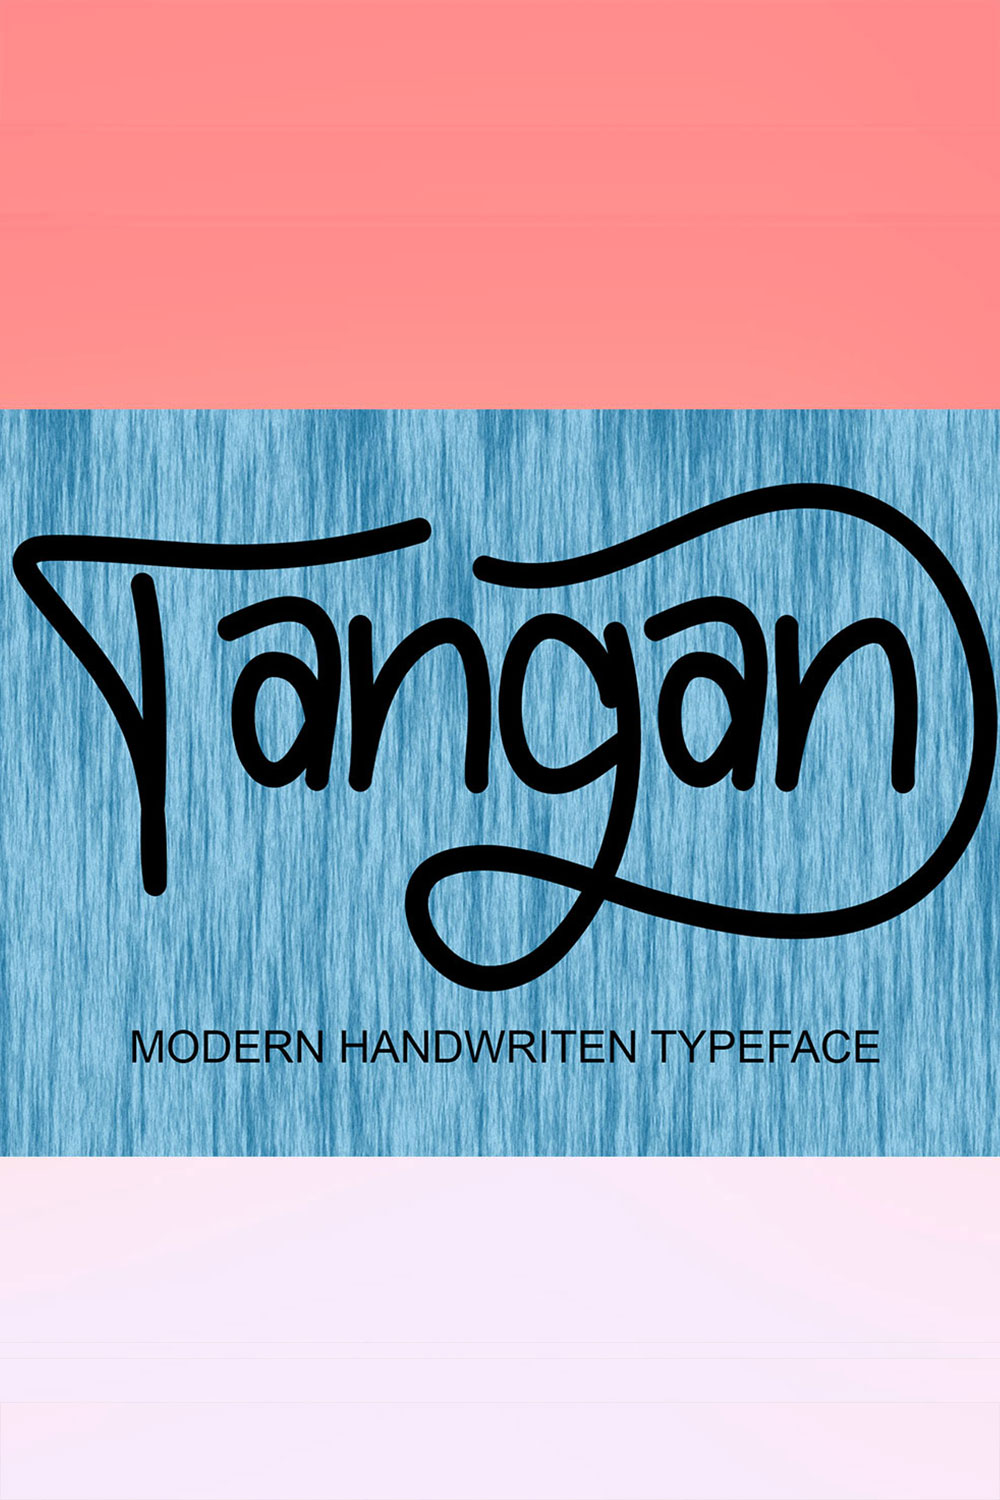 Tangan-only$8 pinterest preview image.